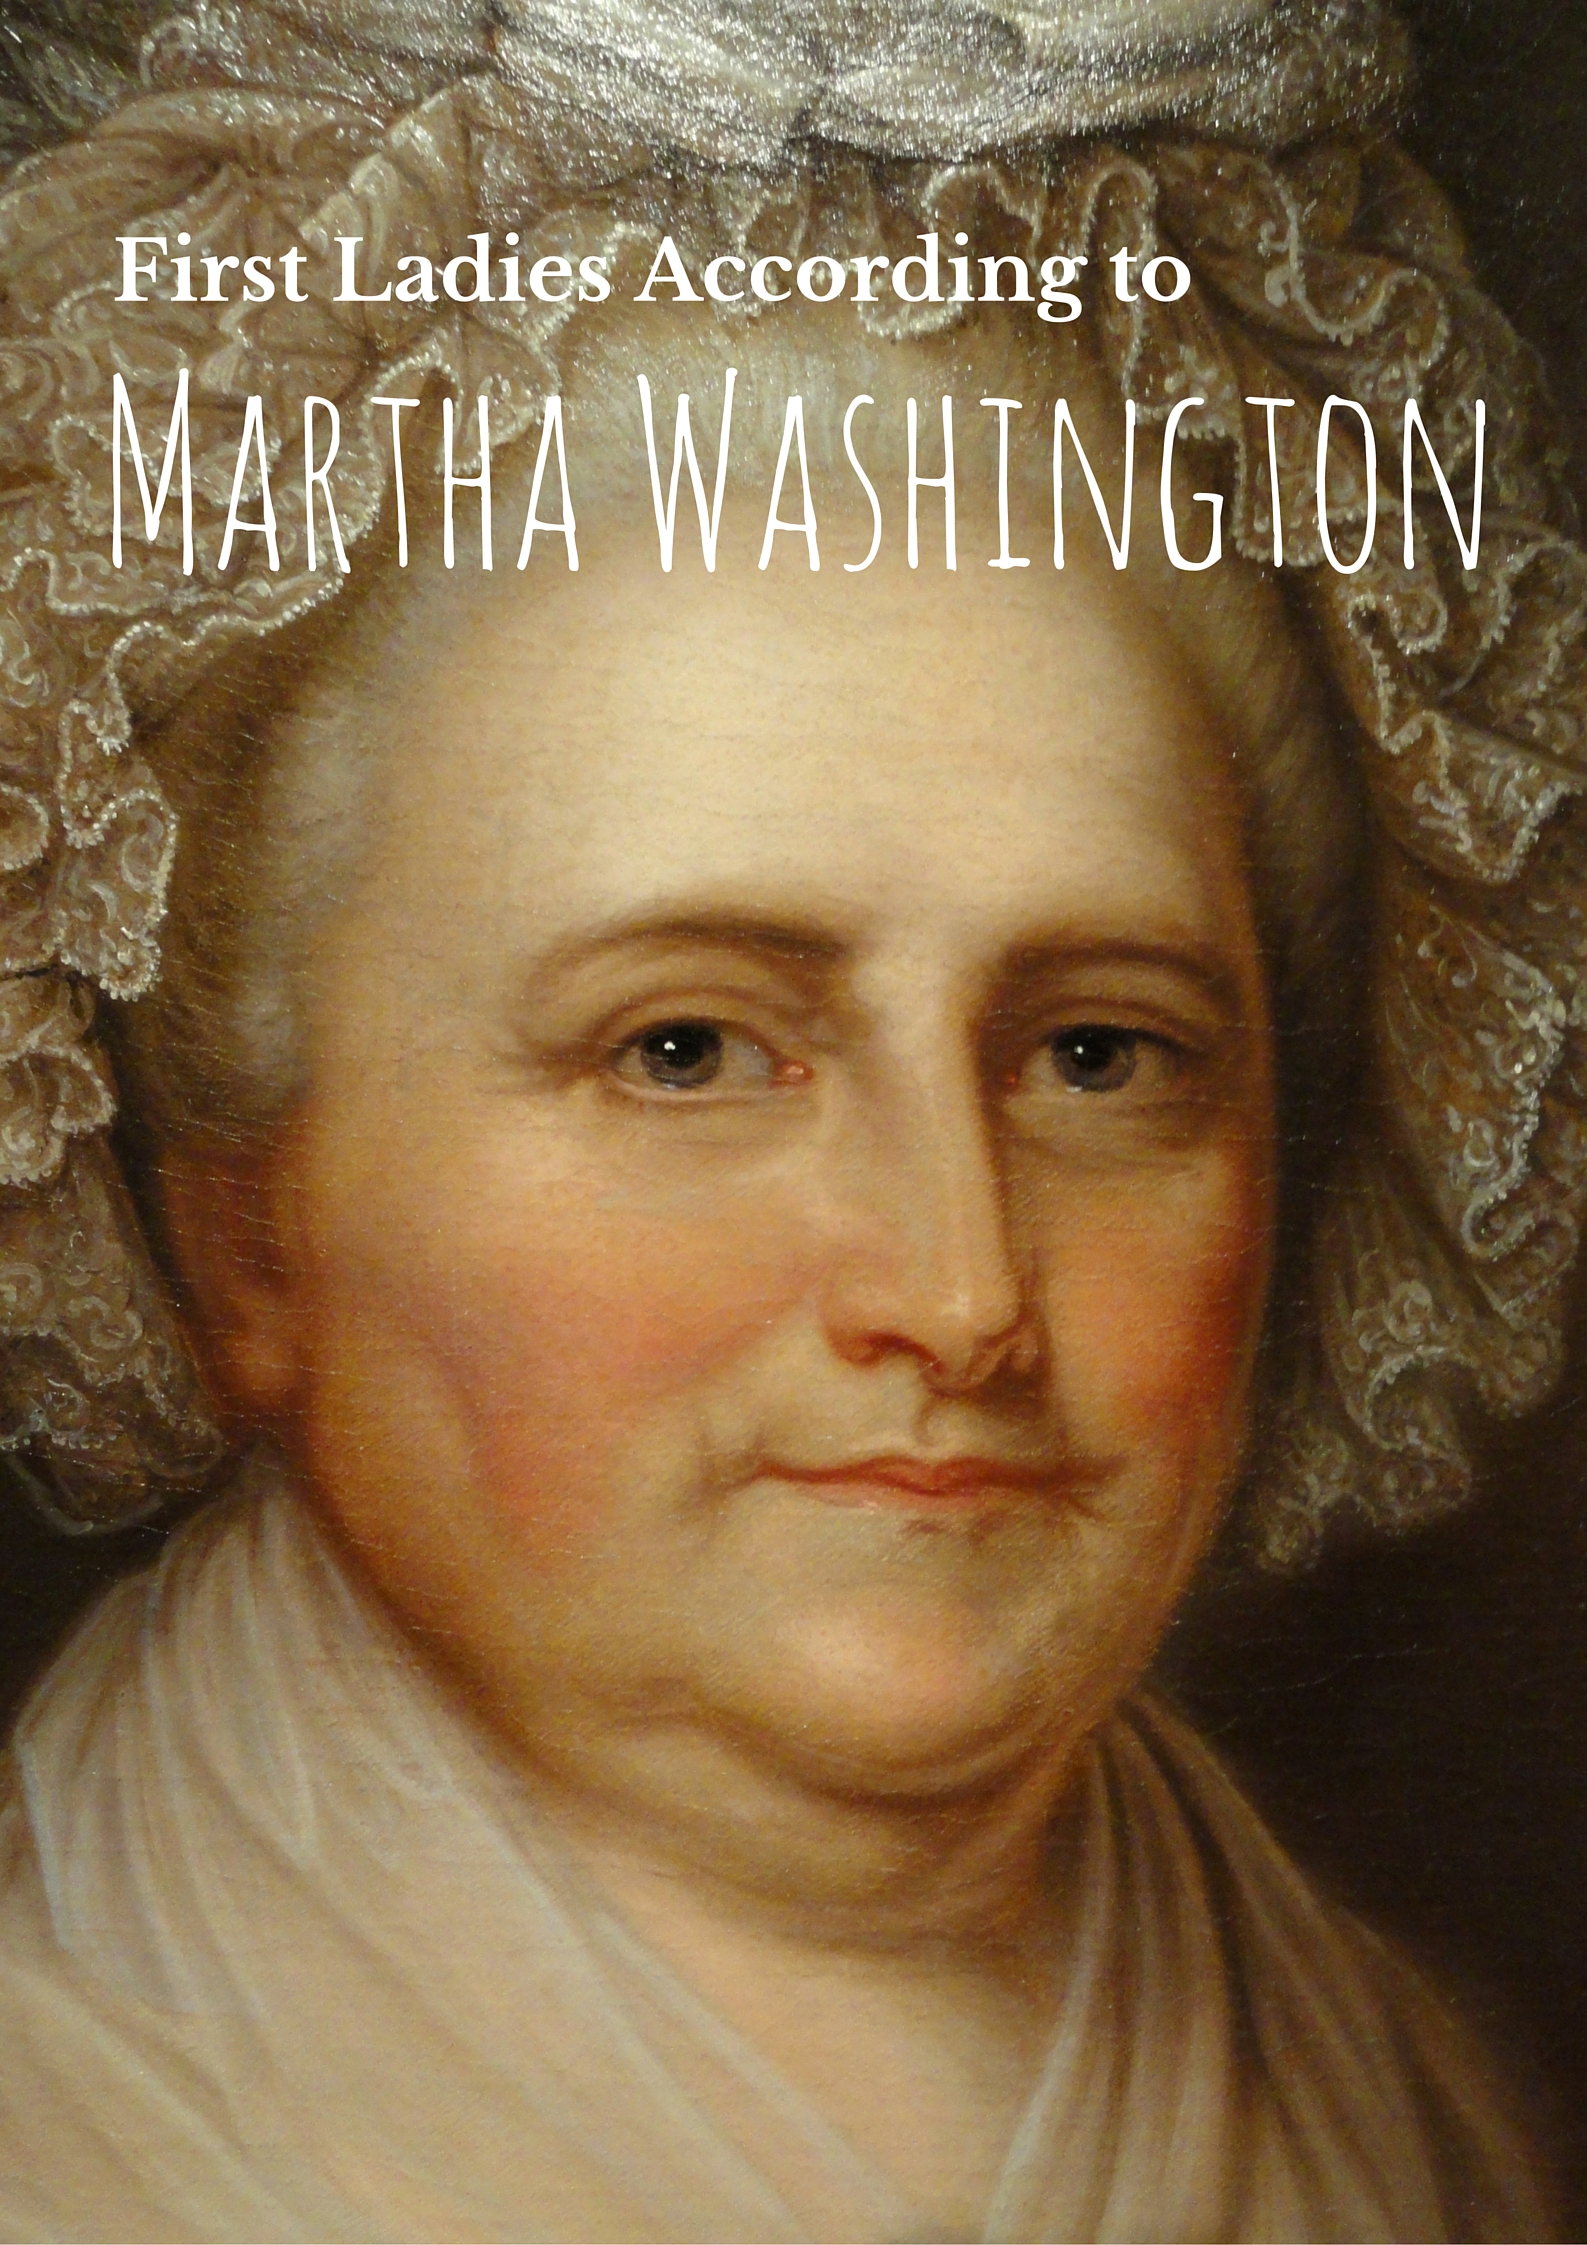 What are some facts about Martha Washington?